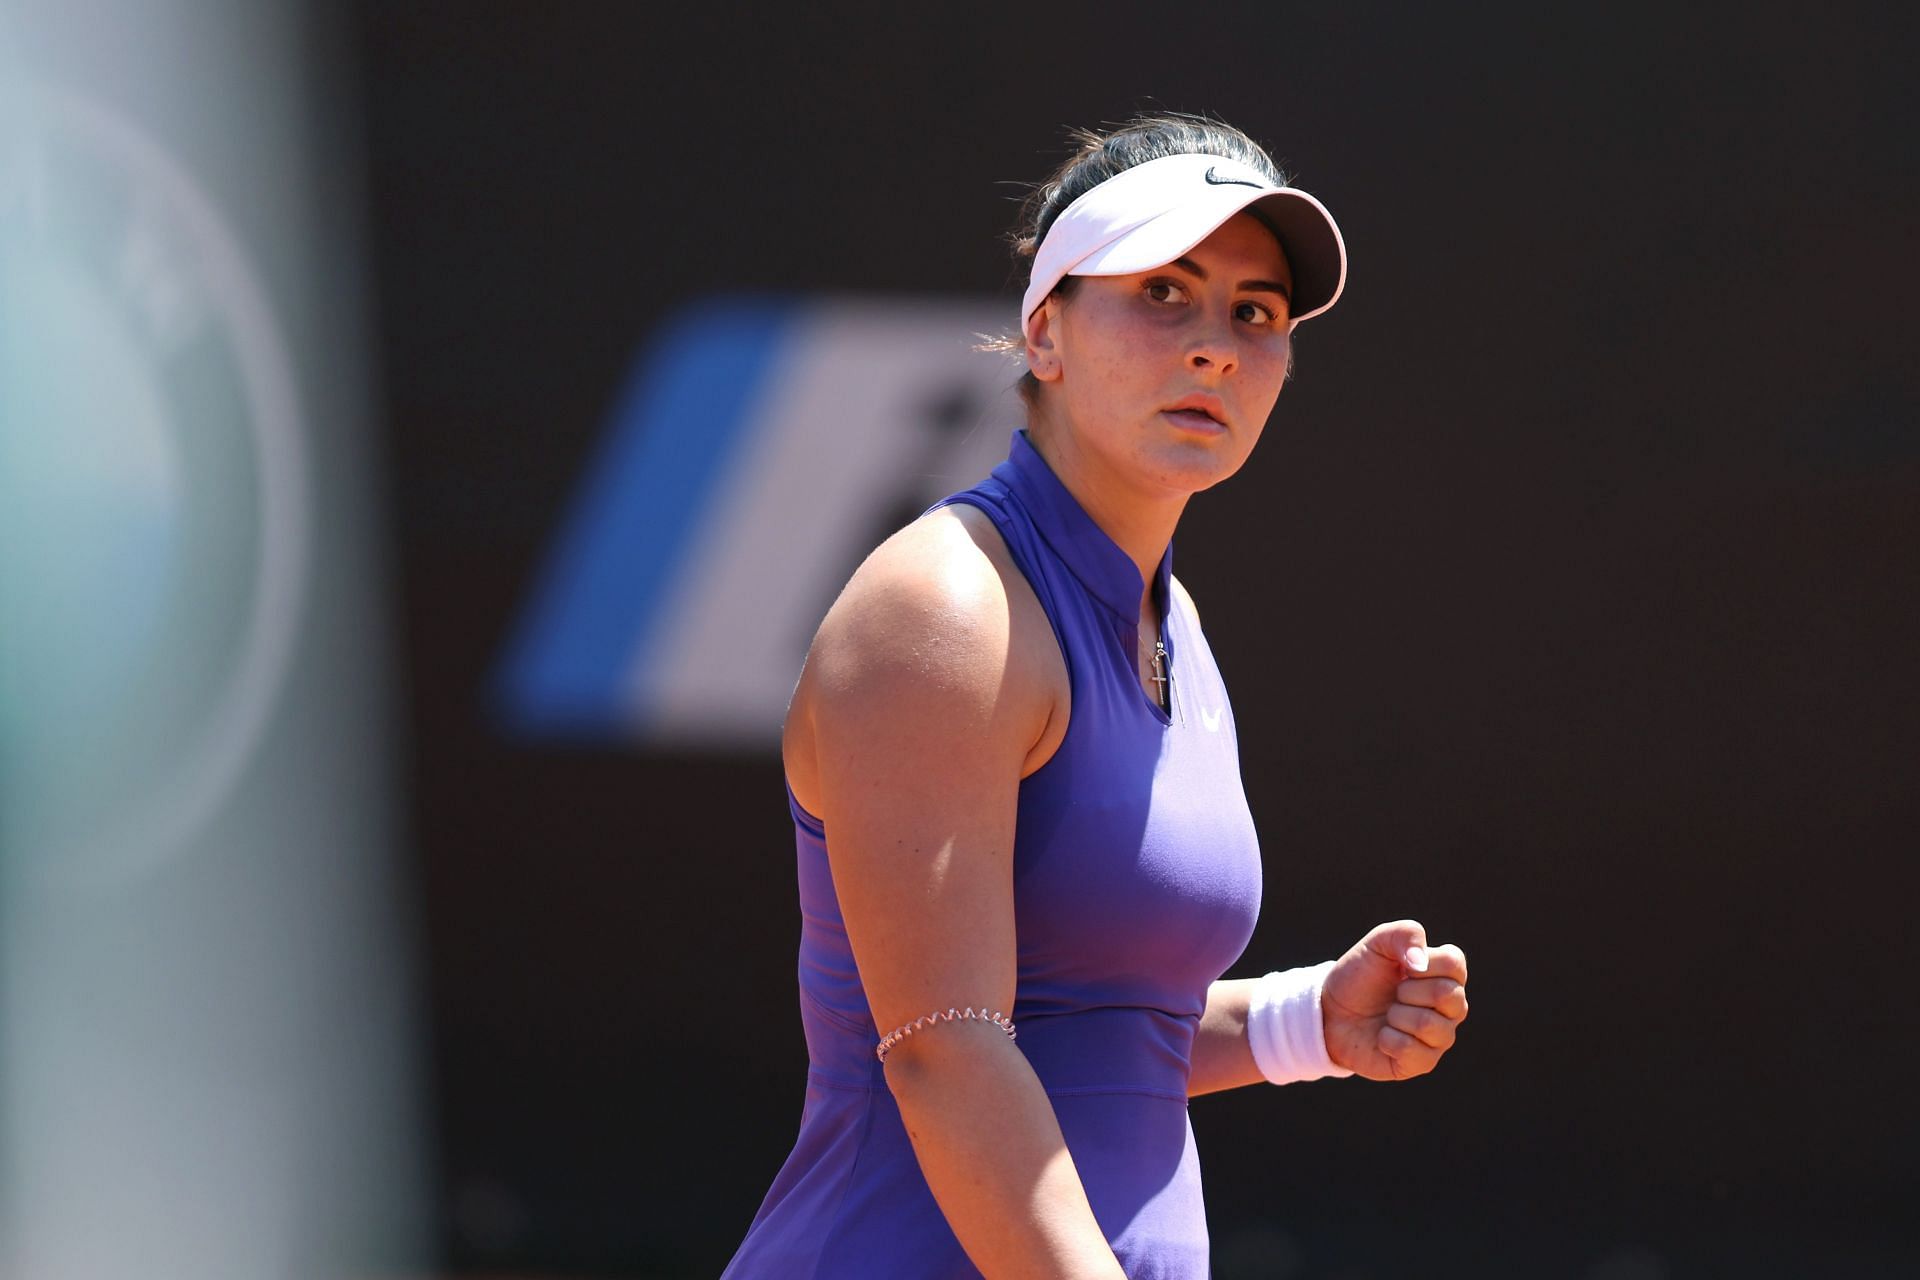 Bianca Andreescu during a match at the 2022 Italian Open